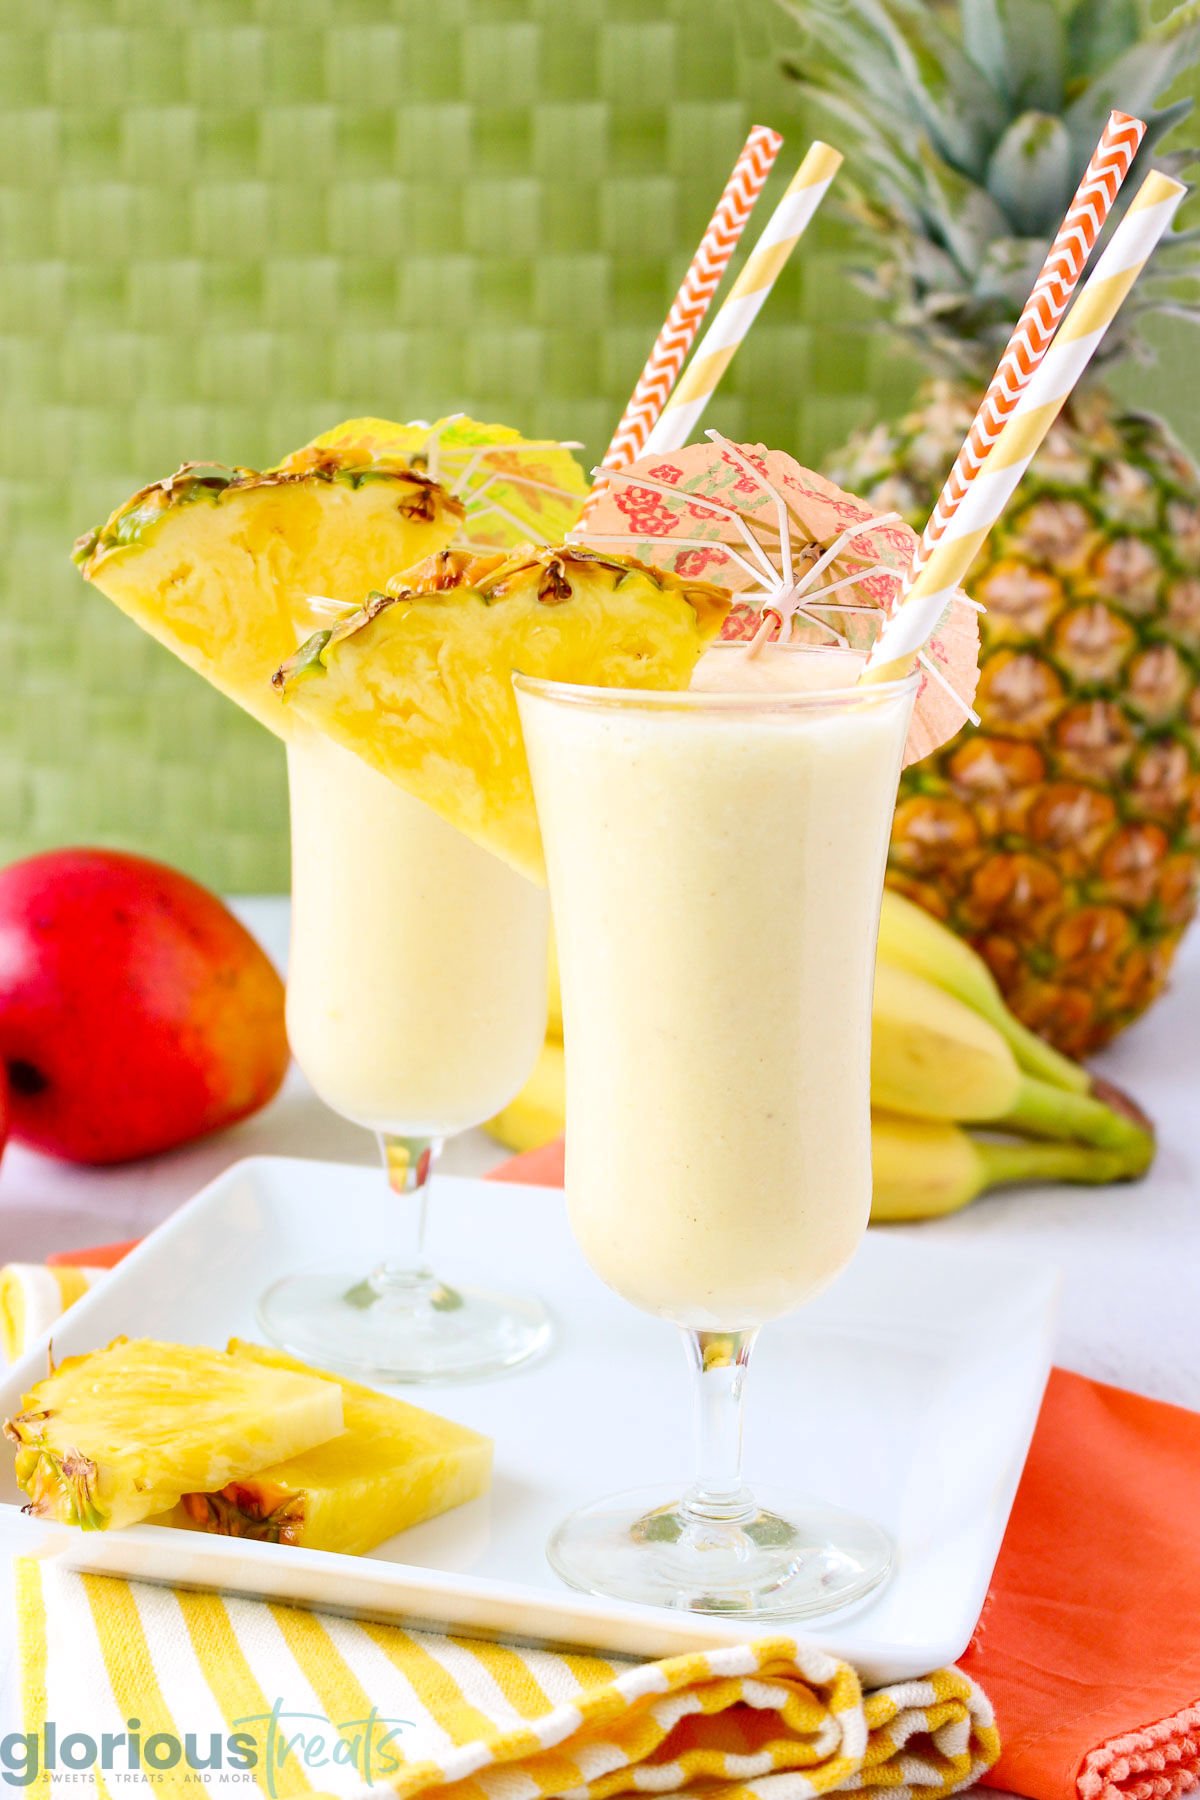 two fruit smoothies on a white serving platter with pineapple slices and bananas, pineapples, and more fruit in the background.